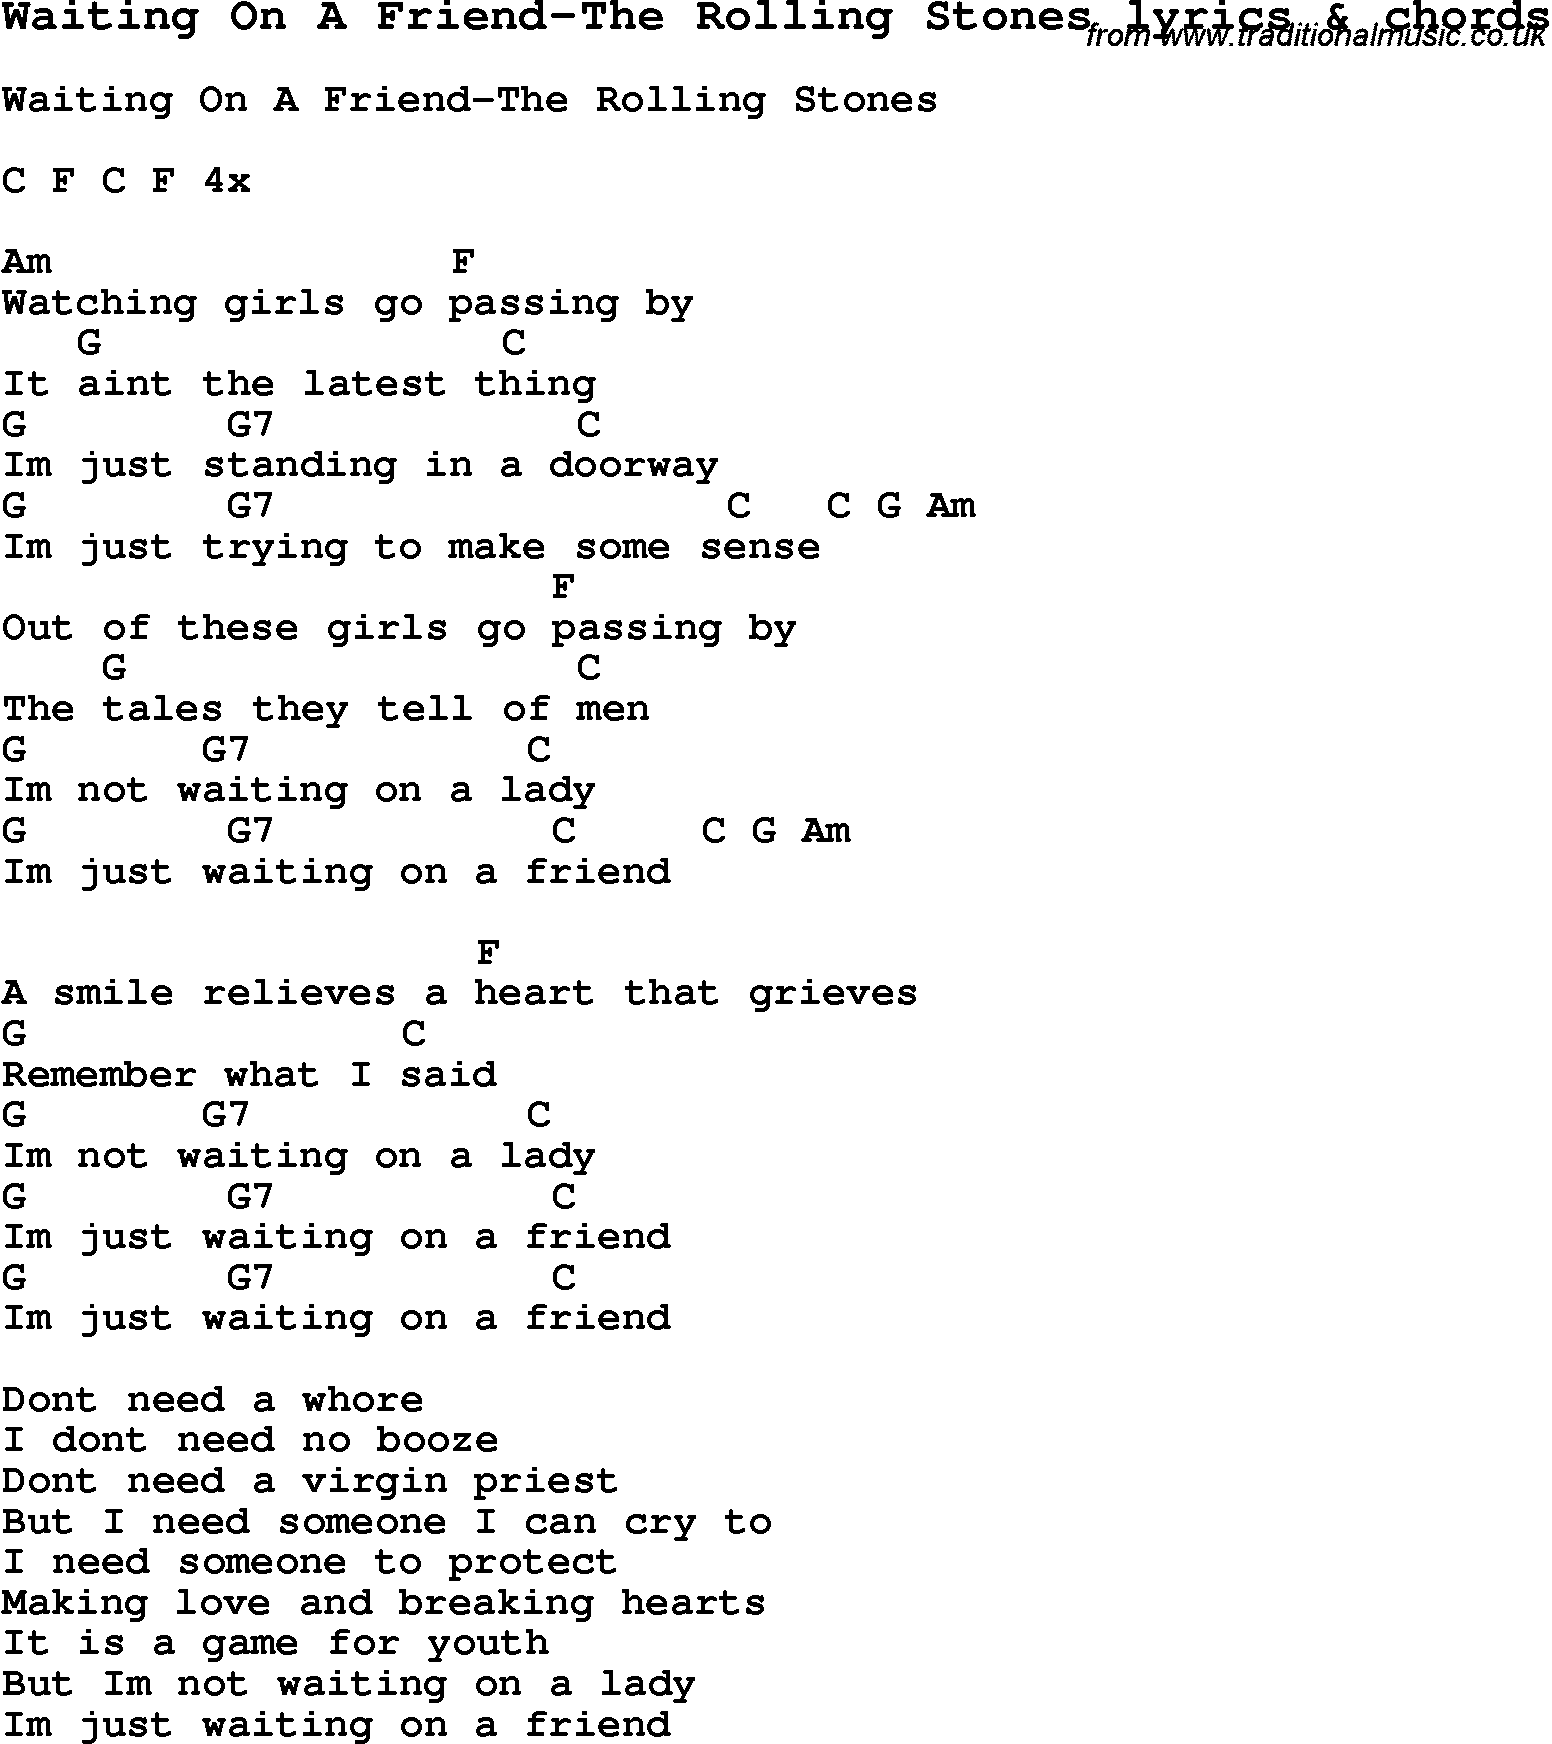 Love Song Lyrics for: Waiting On A Friend-The Rolling Stones with chords for Ukulele, Guitar Banjo etc.